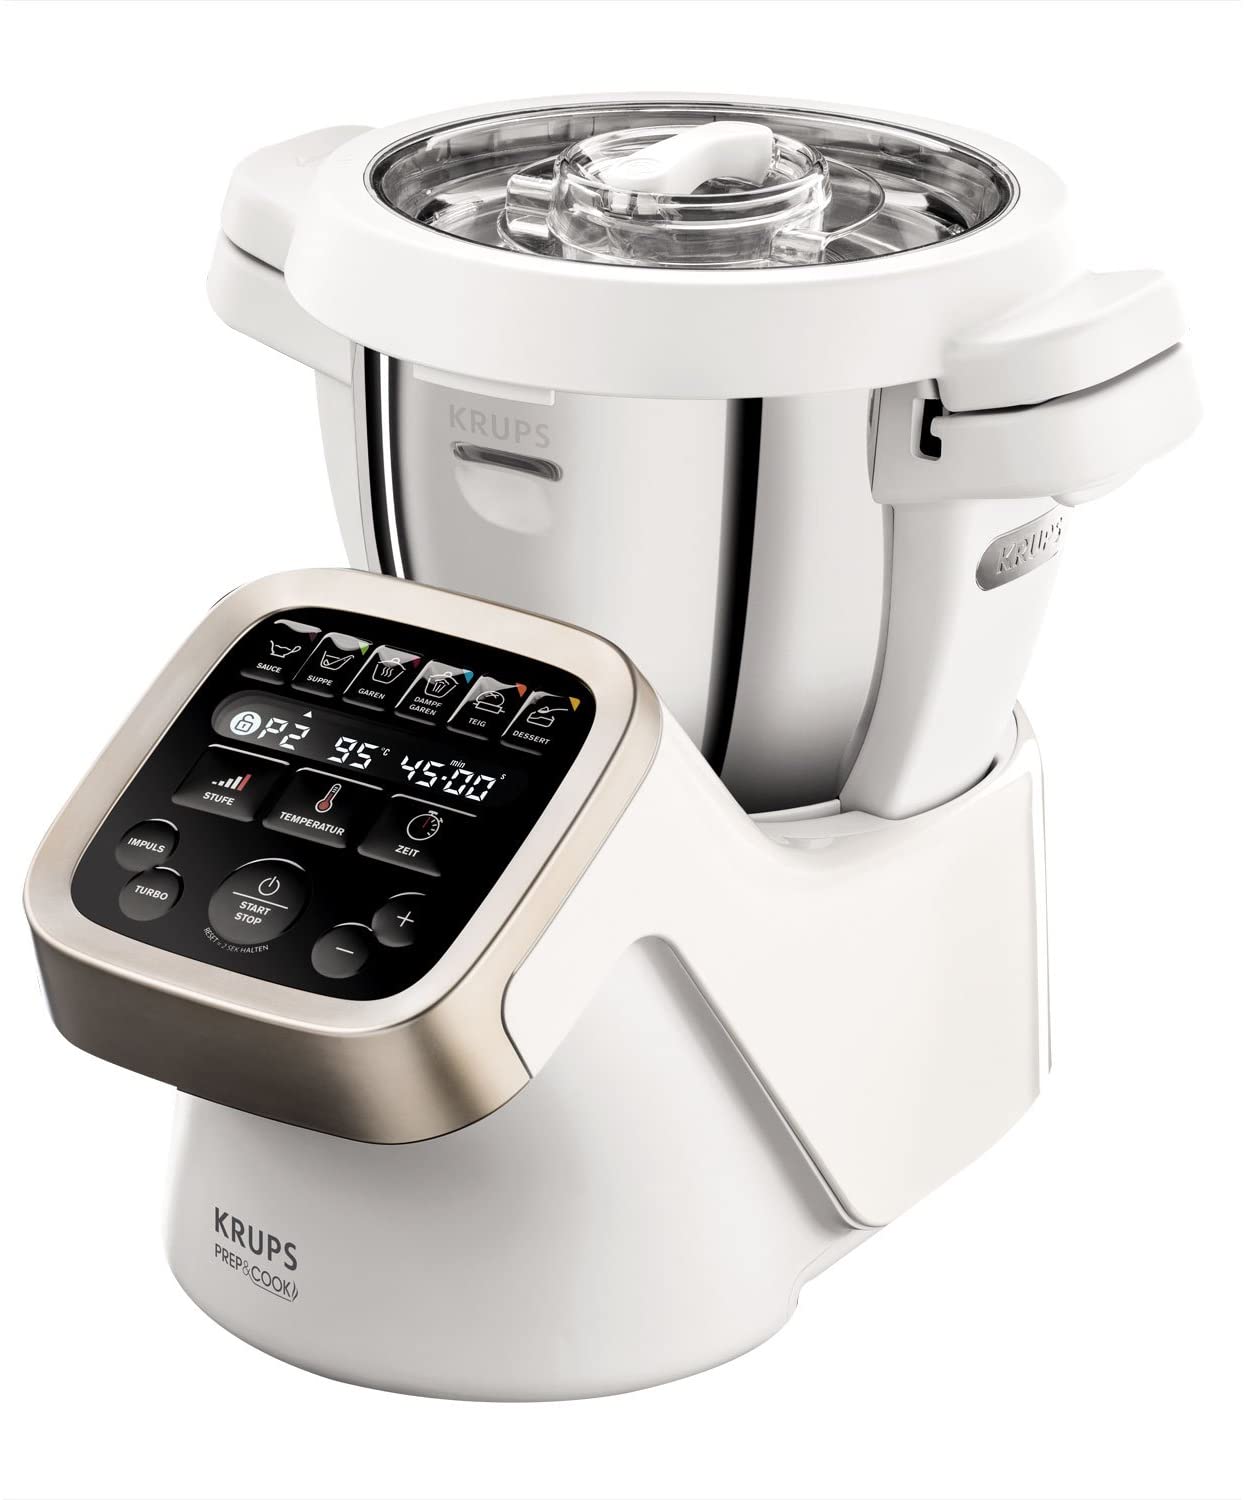 Multifunction food processor Krups Prep & Cook HP5031 | 1550 W | up to 12,000 rpm with cooking function White / stainless steel